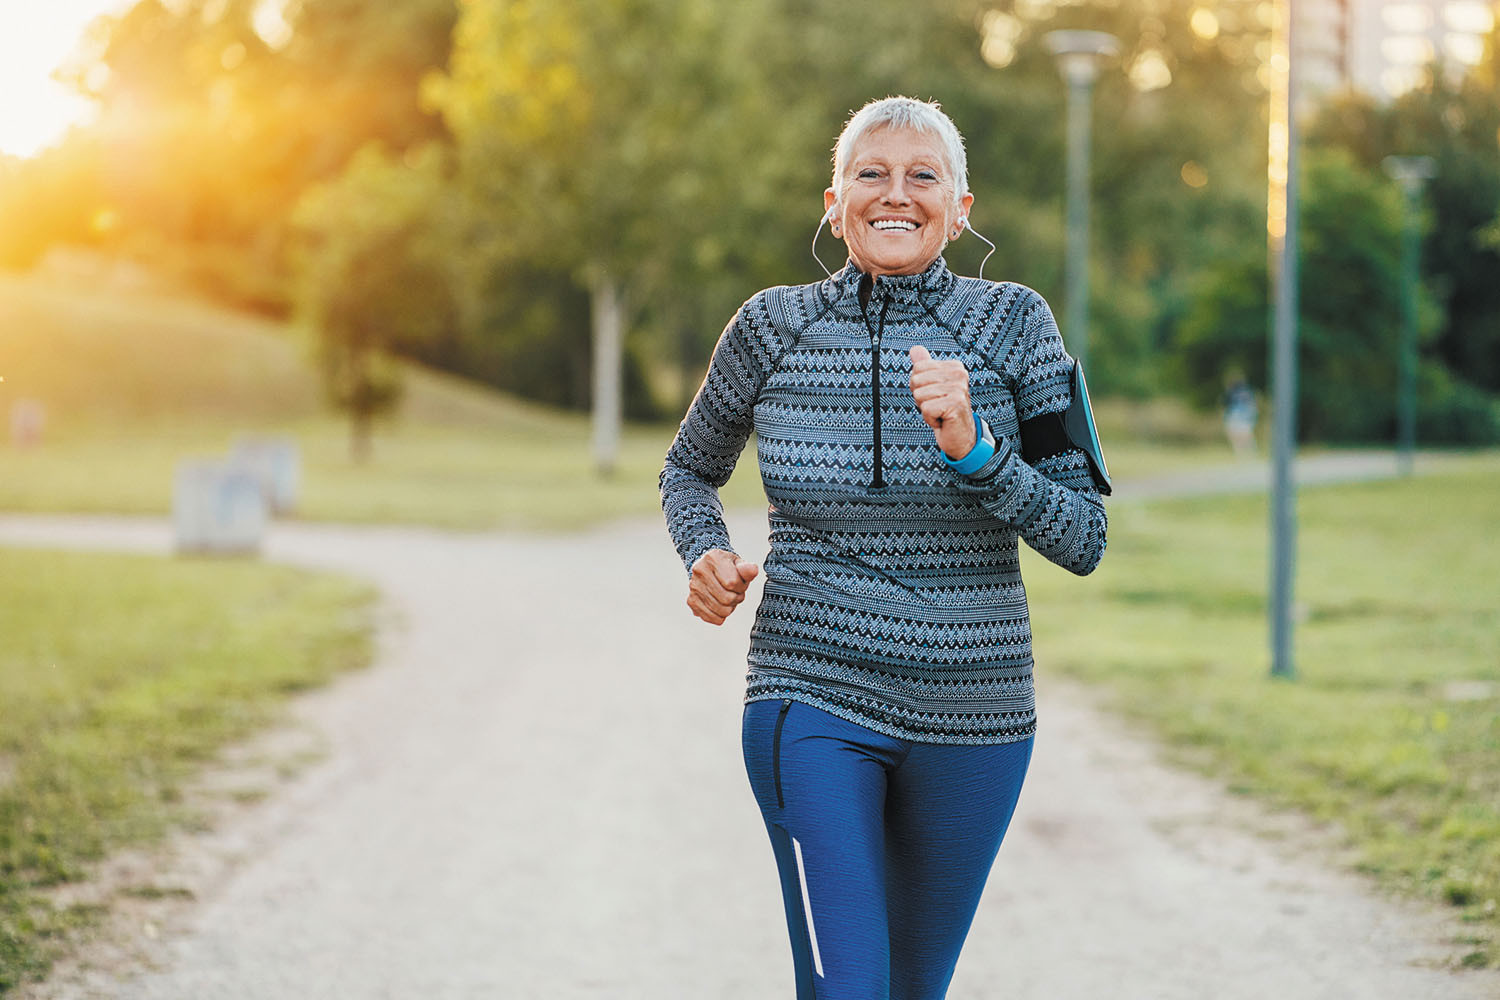 photo of a senior woman jogging in a park